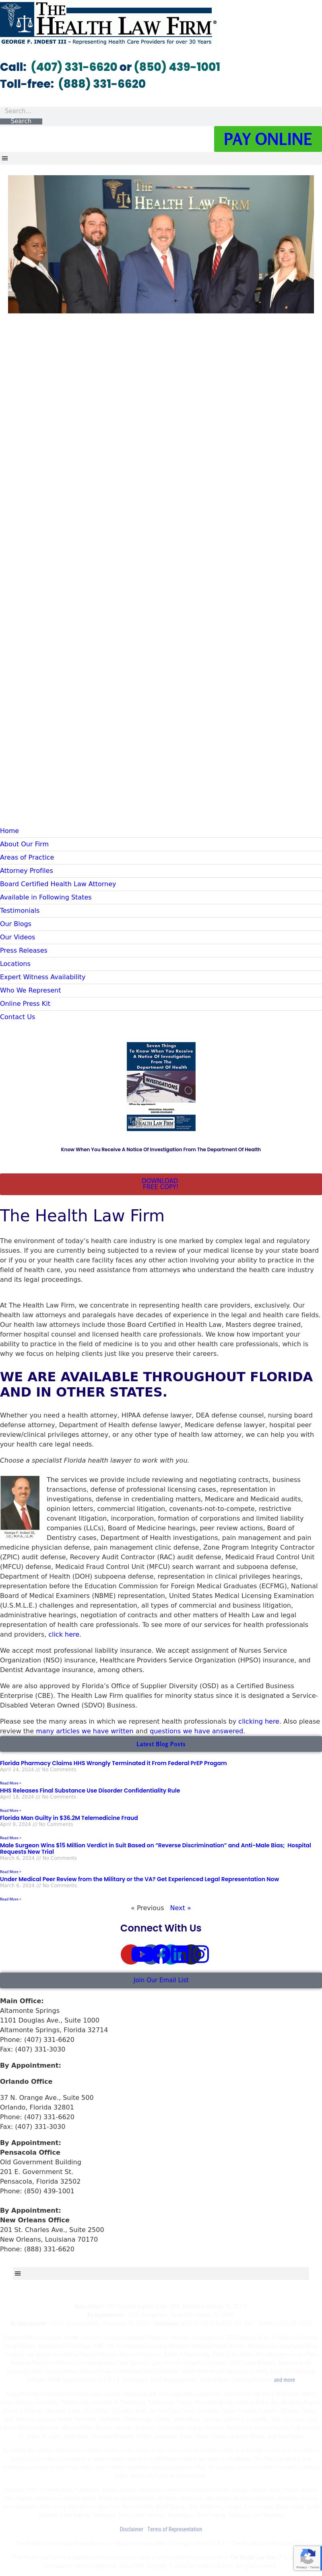 The Health Law Firm - Altamonte Springs FL Lawyers